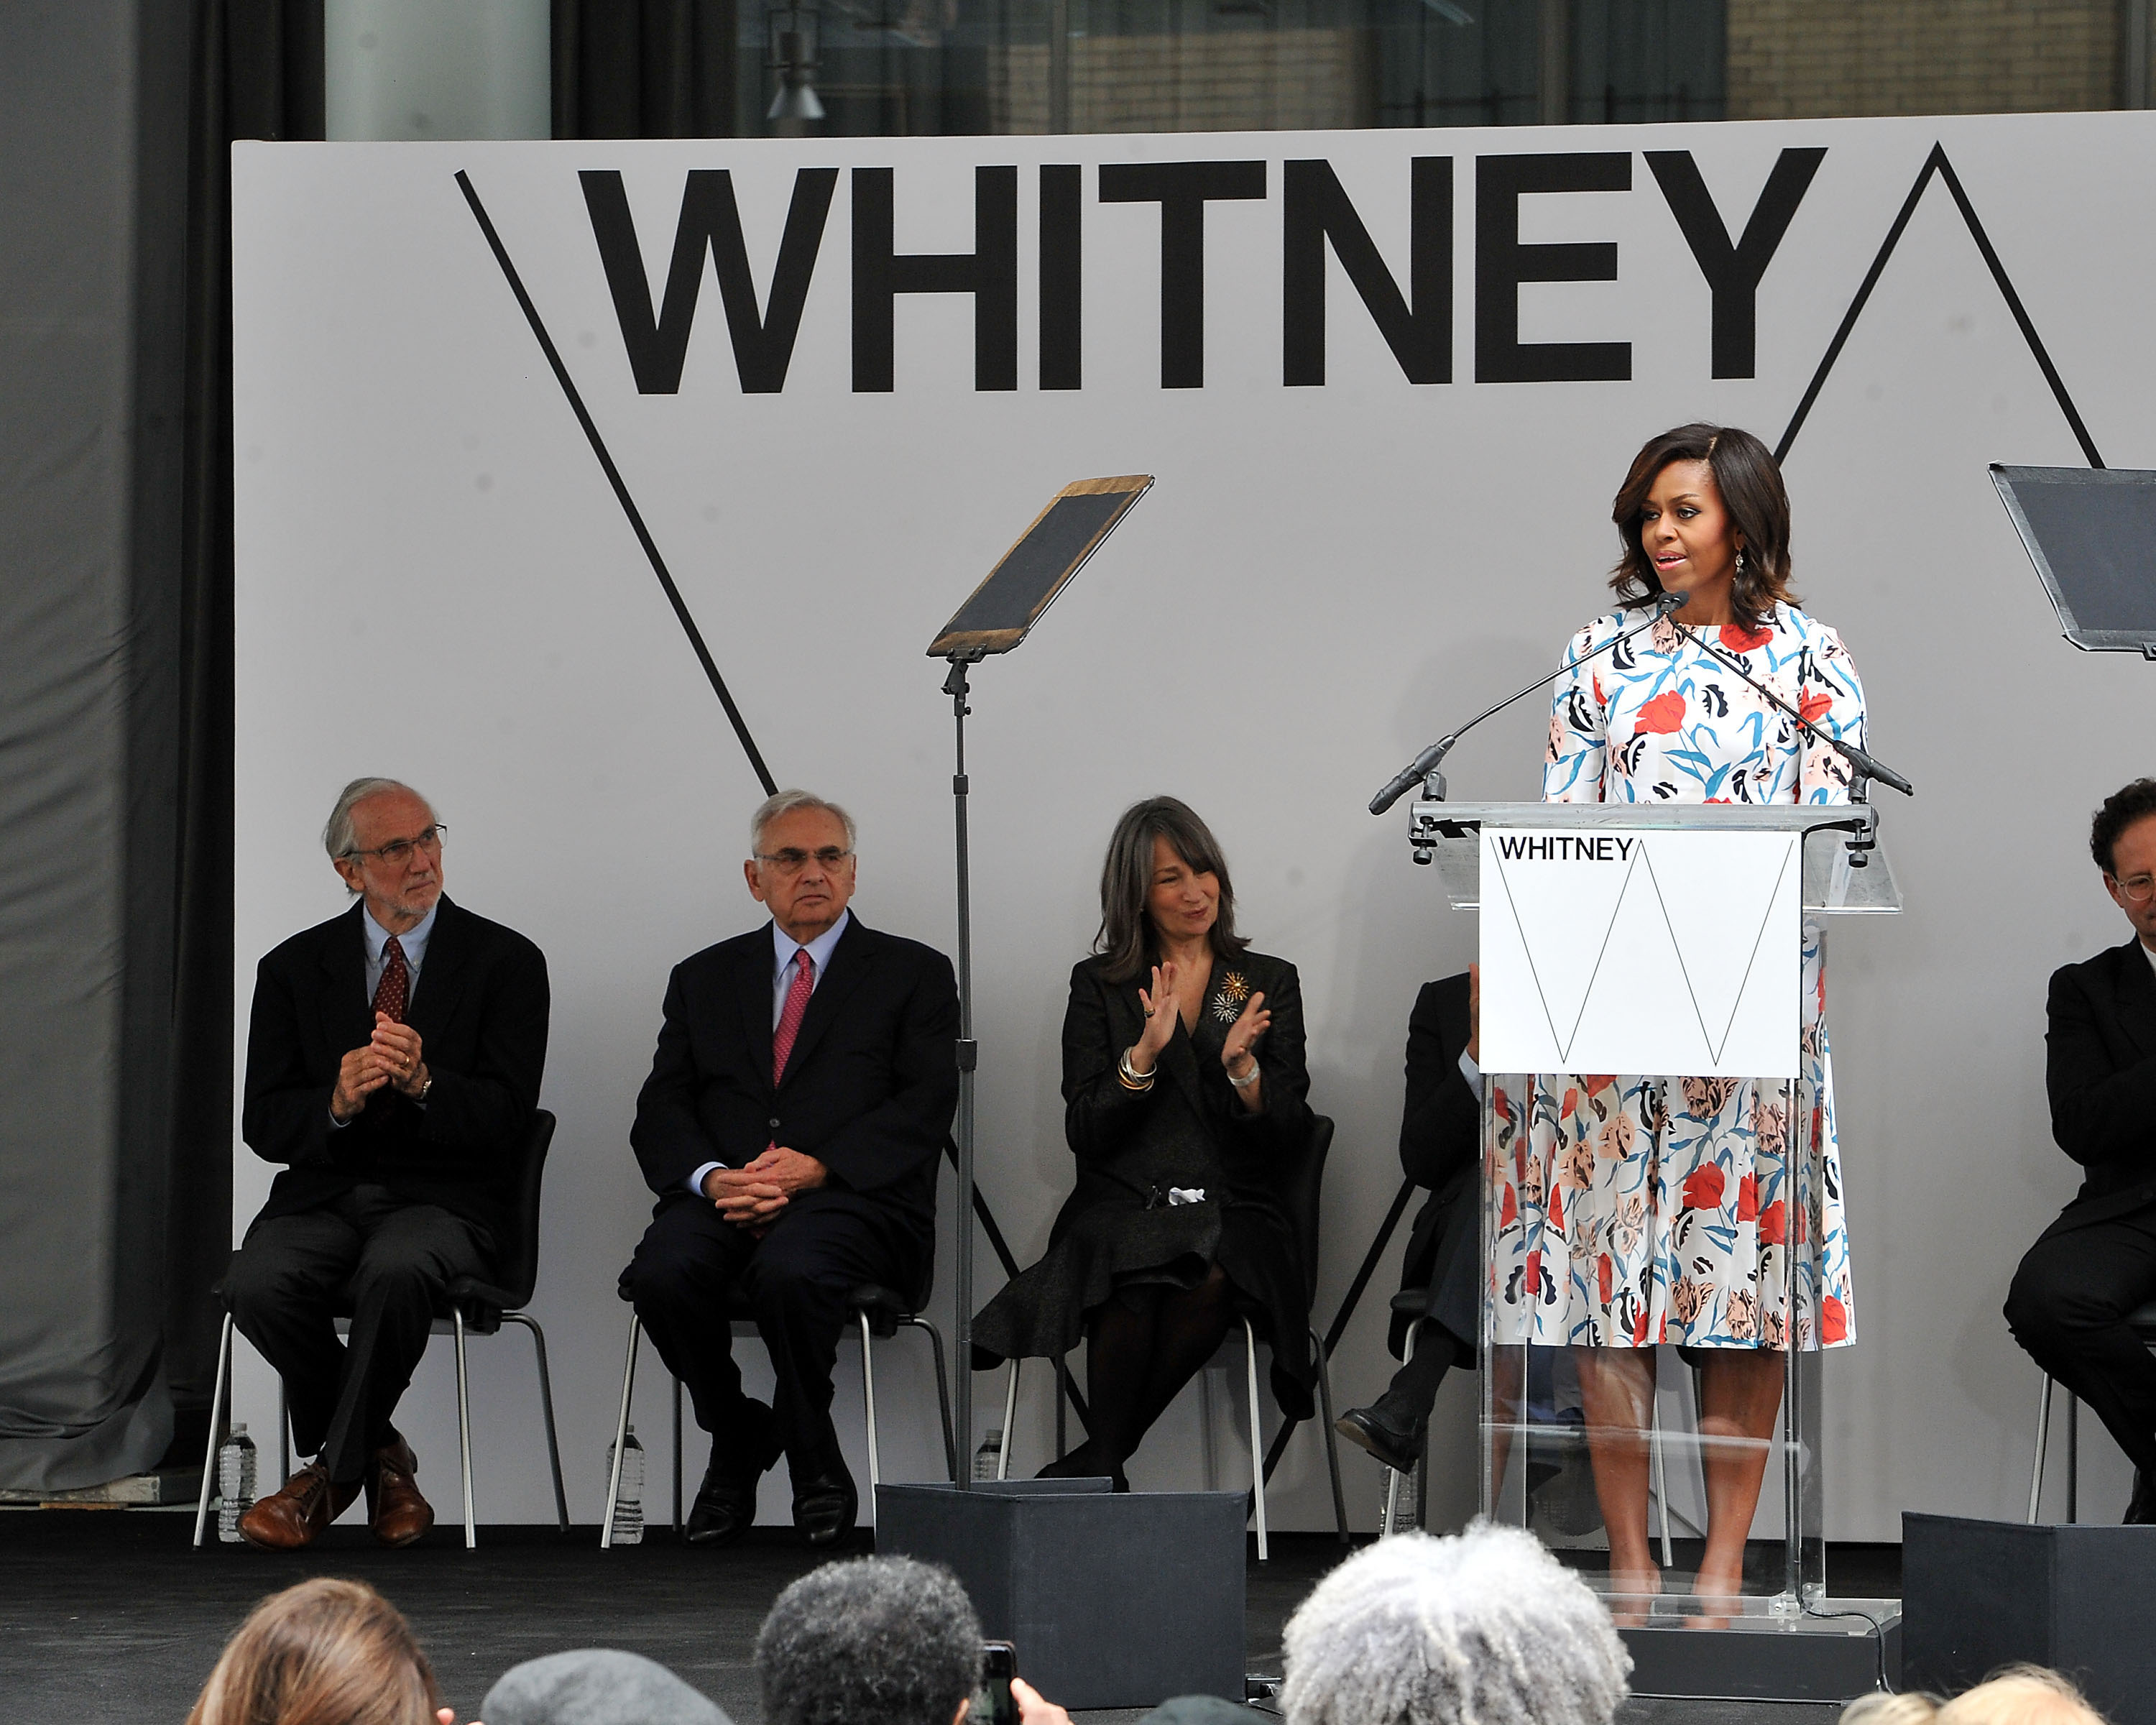 From left: Renzo Piano, Neil Bluhm, Brooke Garber Neidich and First Lady Michelle Obama attend the Whitney Museum Of American Art Ribbon Cutting Ceremony at The Whitney Museum of American Art in New York City on April 30, 2015.